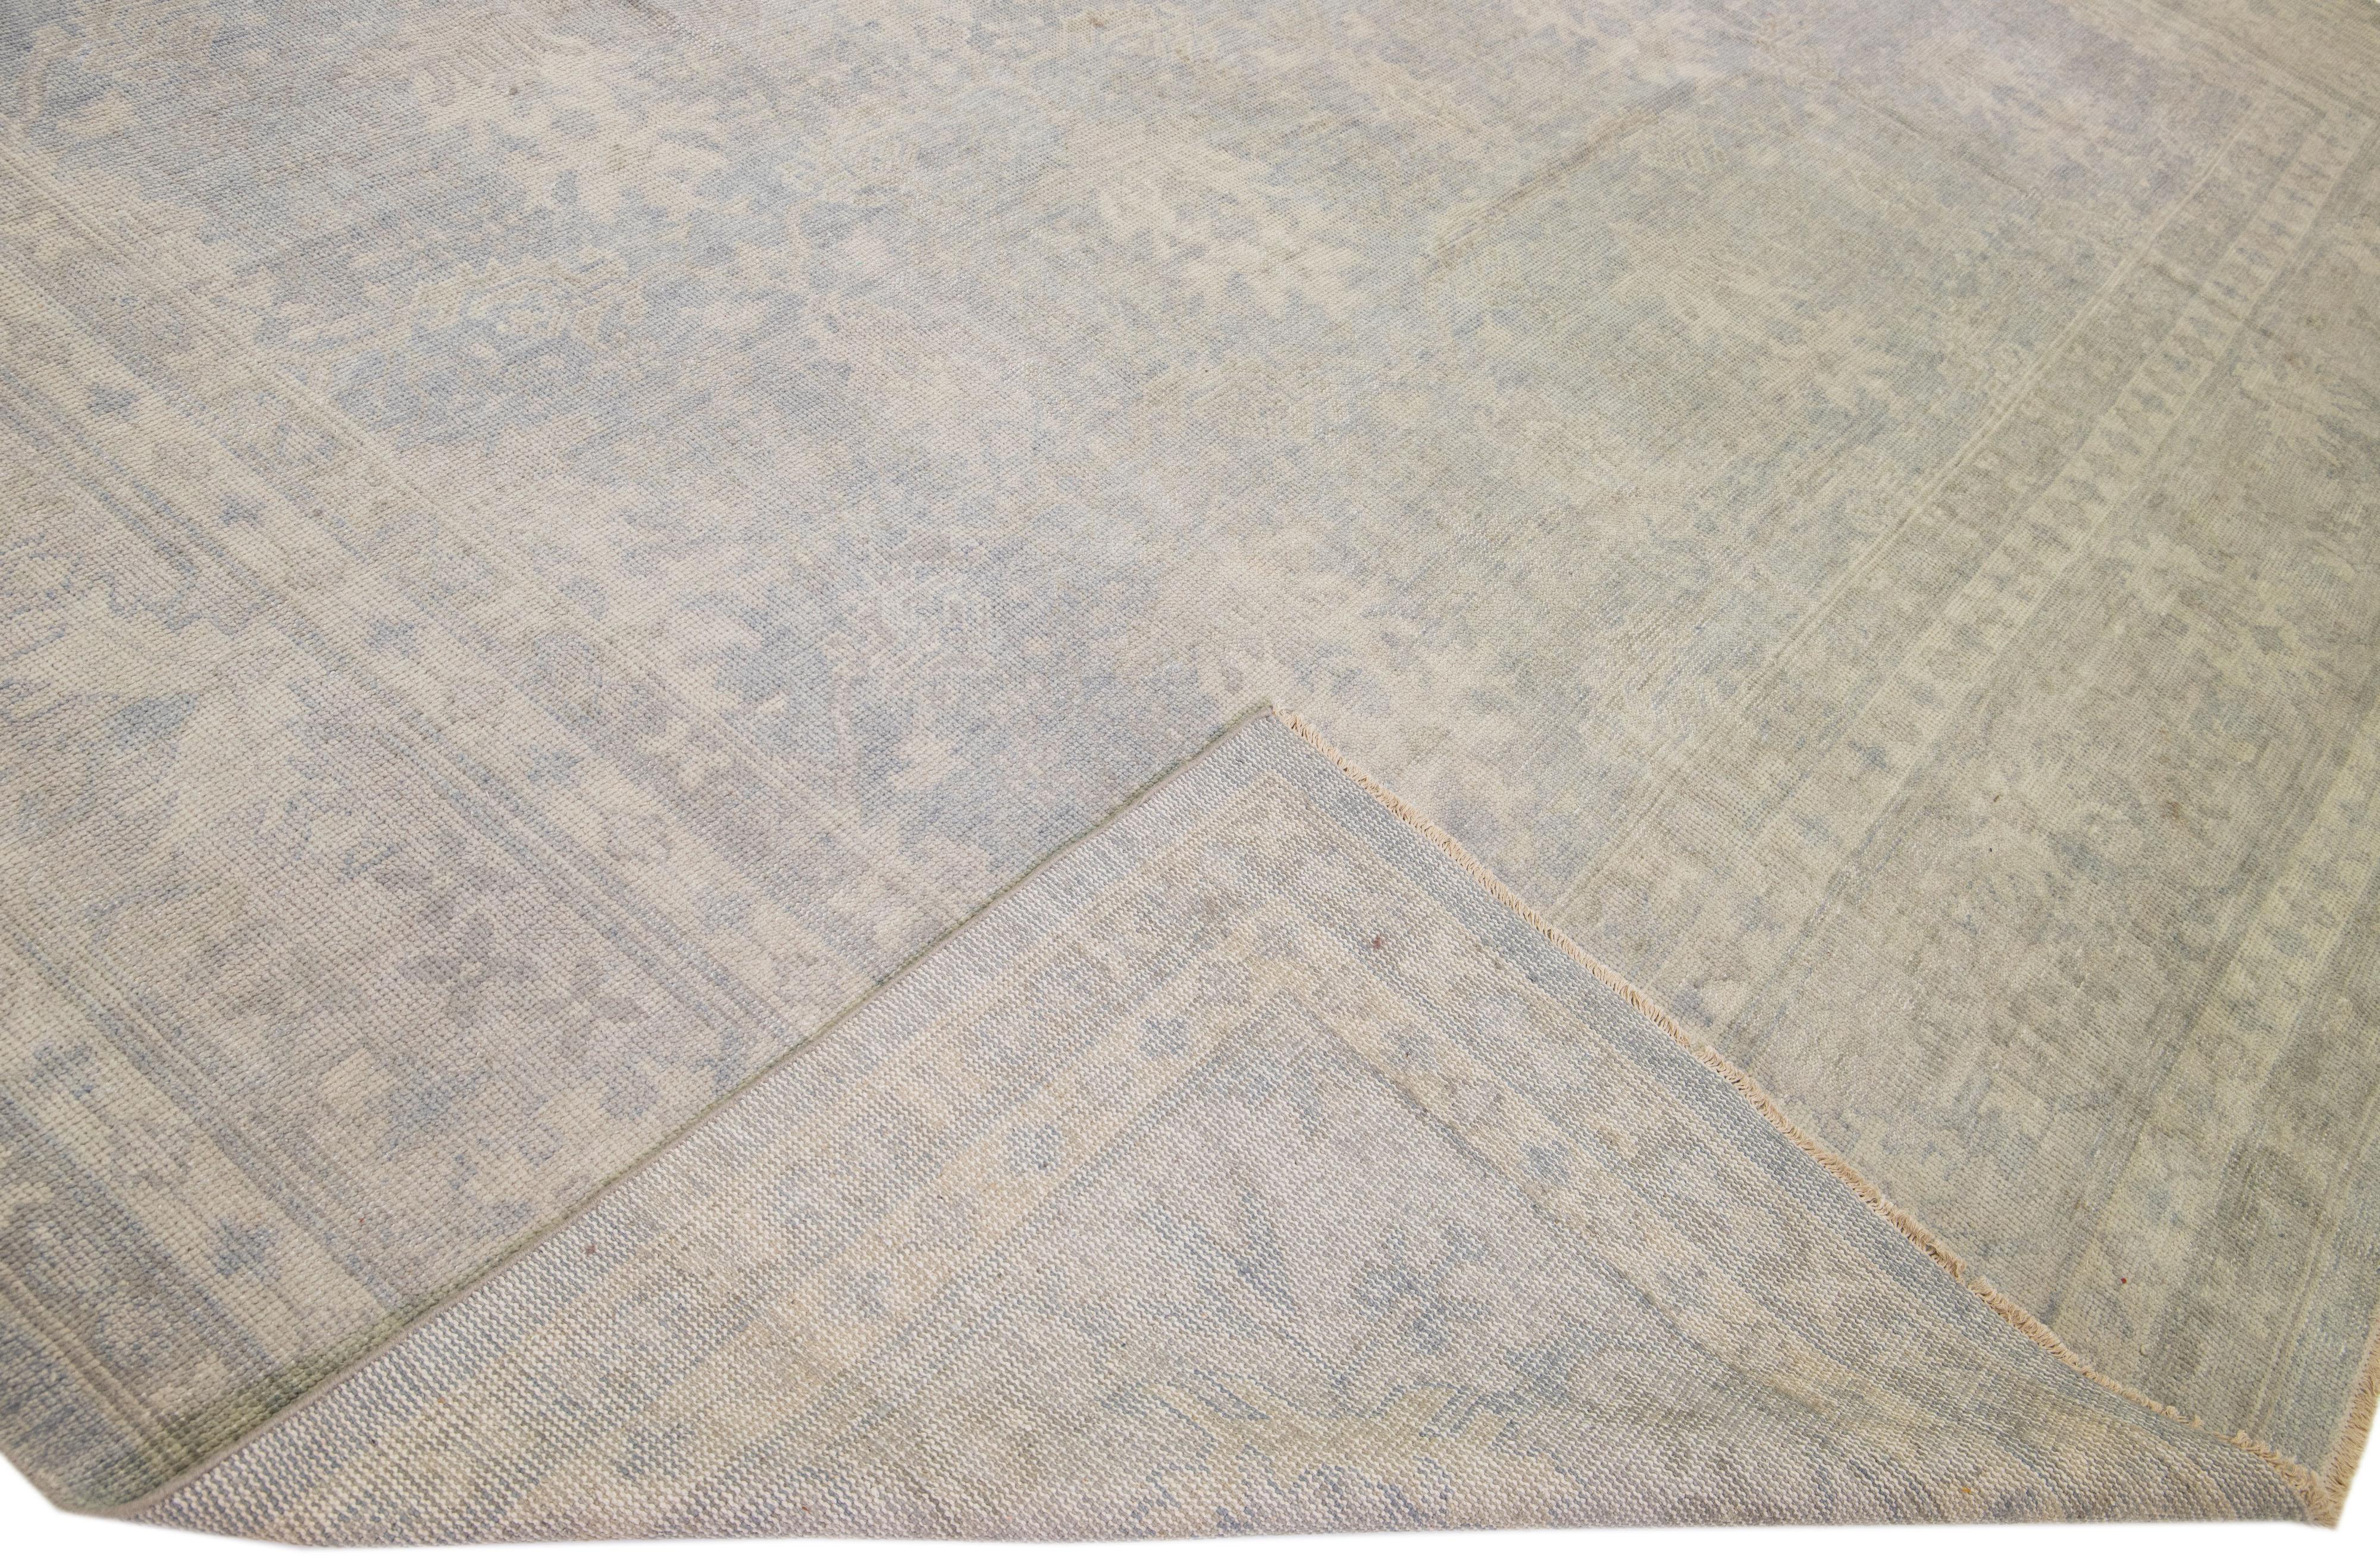 Beautiful modern Oushak hand-knotted wool rug with a light gray color field. This Piece has beige accent colors in a gorgeous all-over pattern design.

This rug measures: 15'9